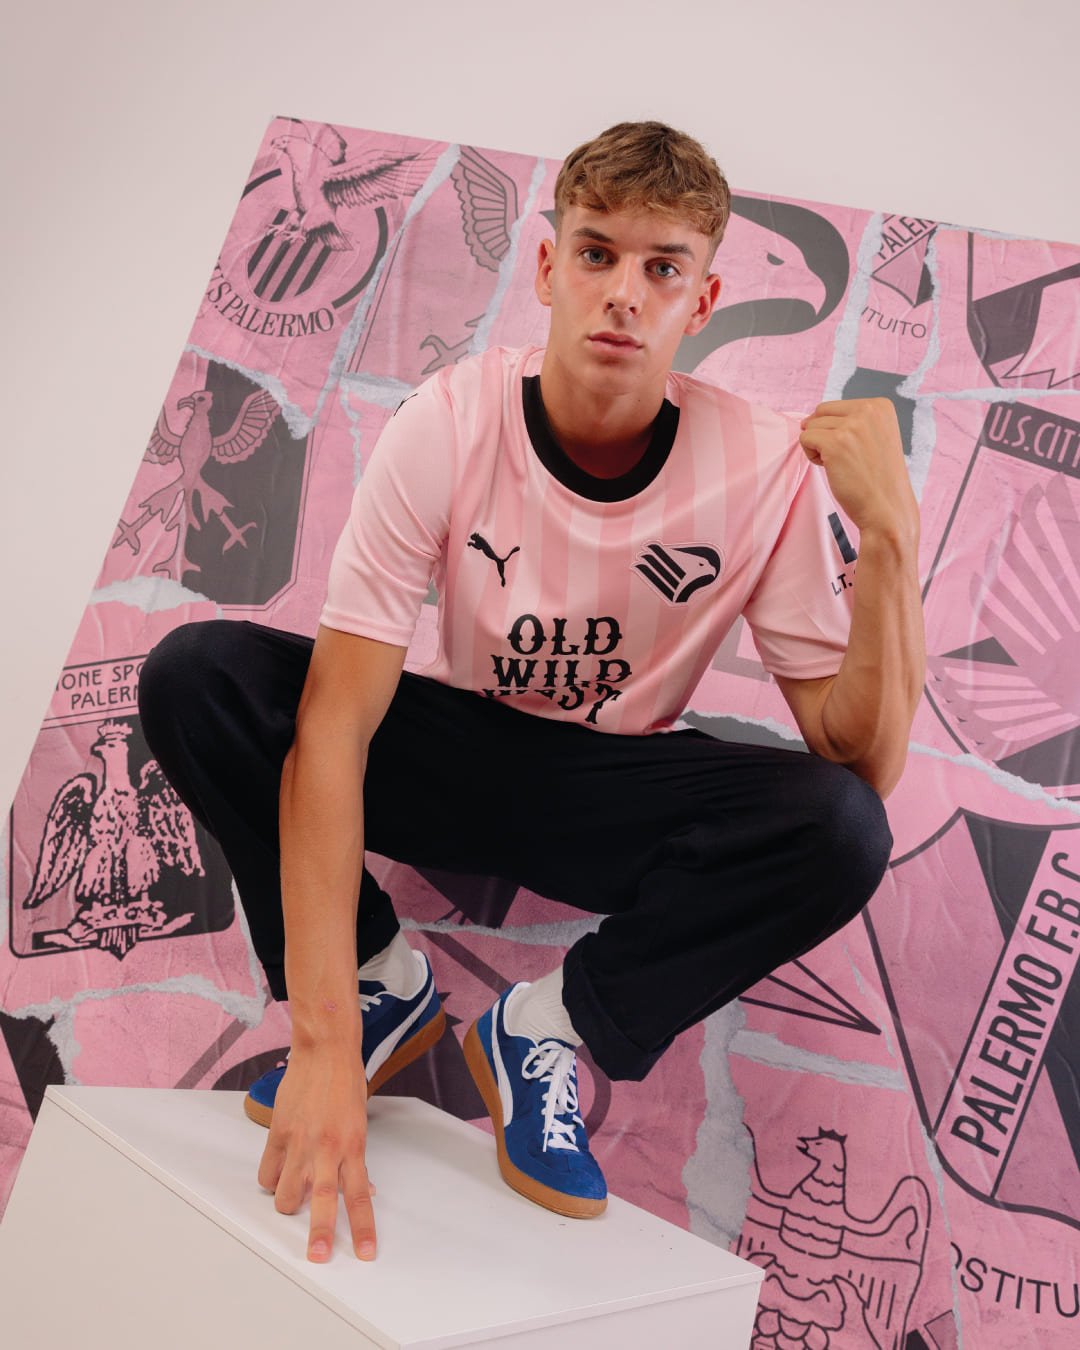 Palermo Puma Match Kit 23/24 - Palermo F.C. Official Store